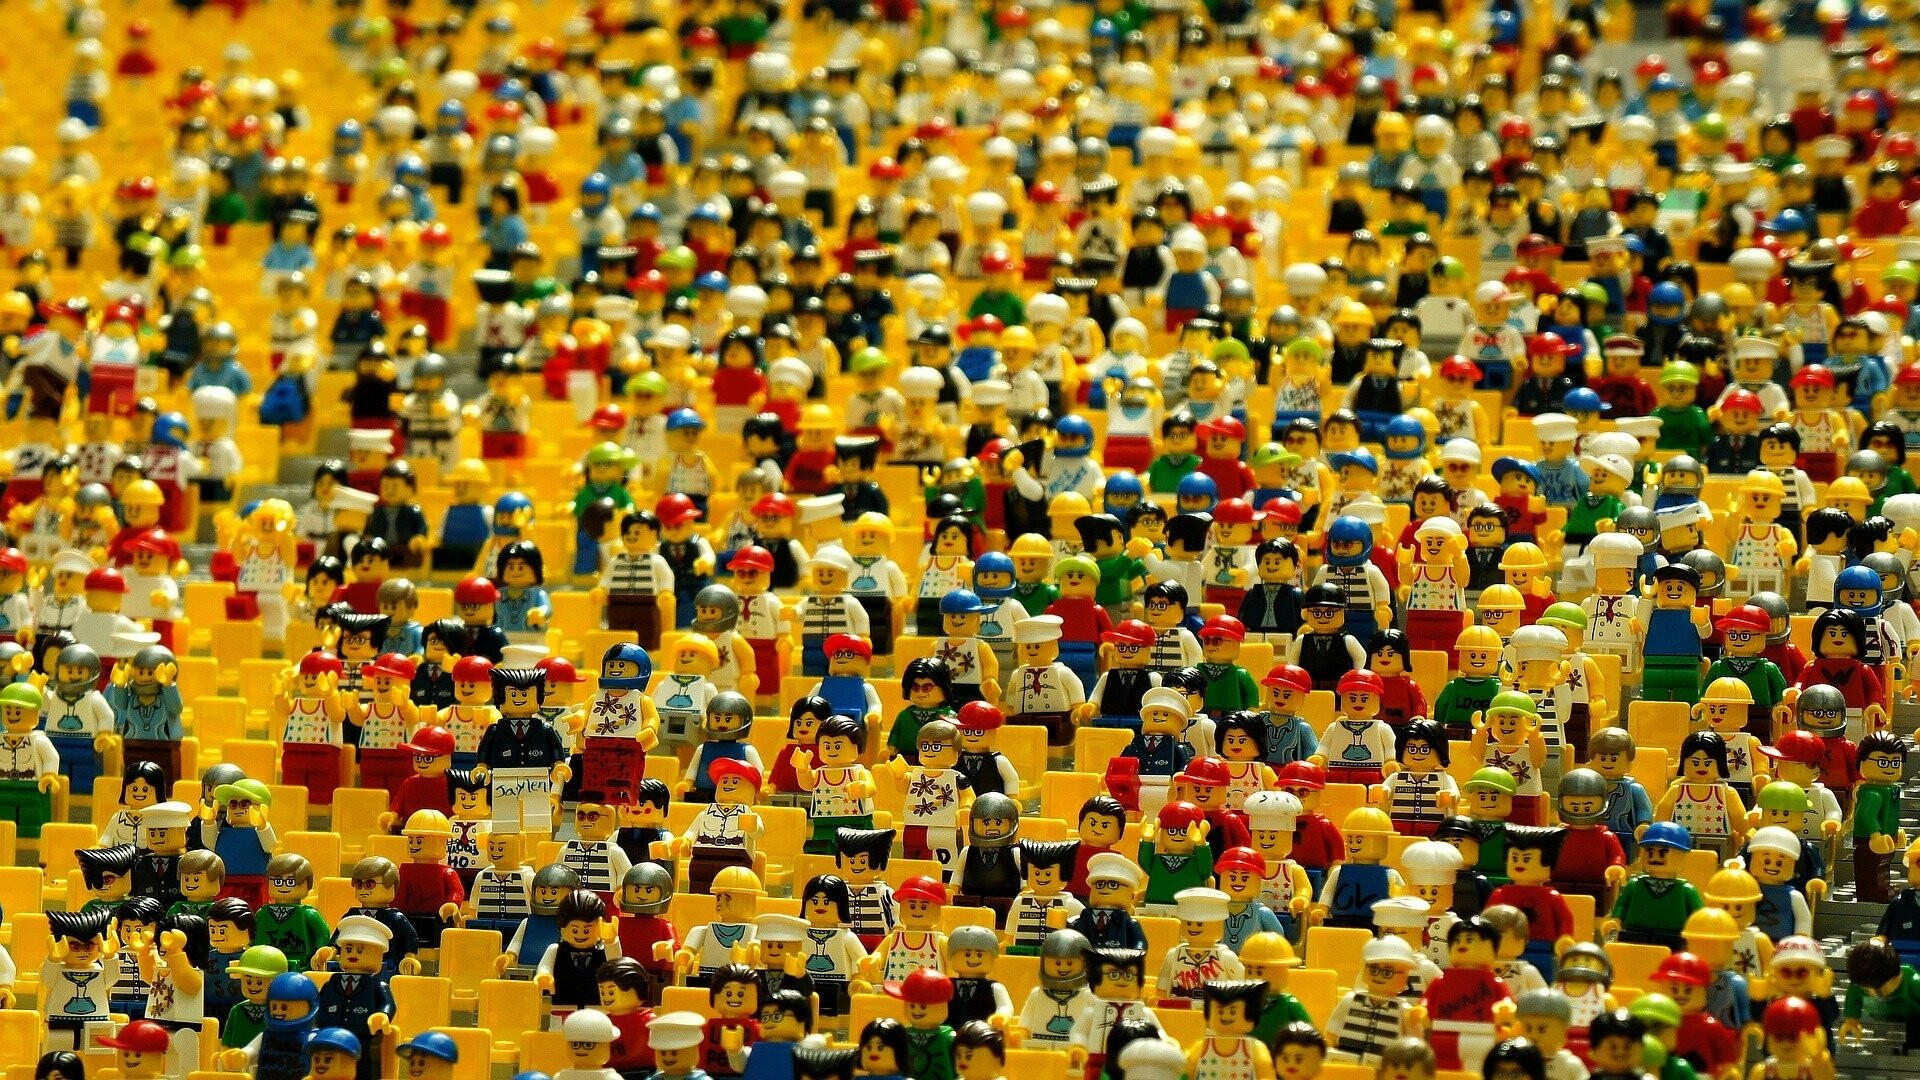 Lego: Minifigures, The largest toy company in the world since 2014. 1920x1080 Full HD Background.